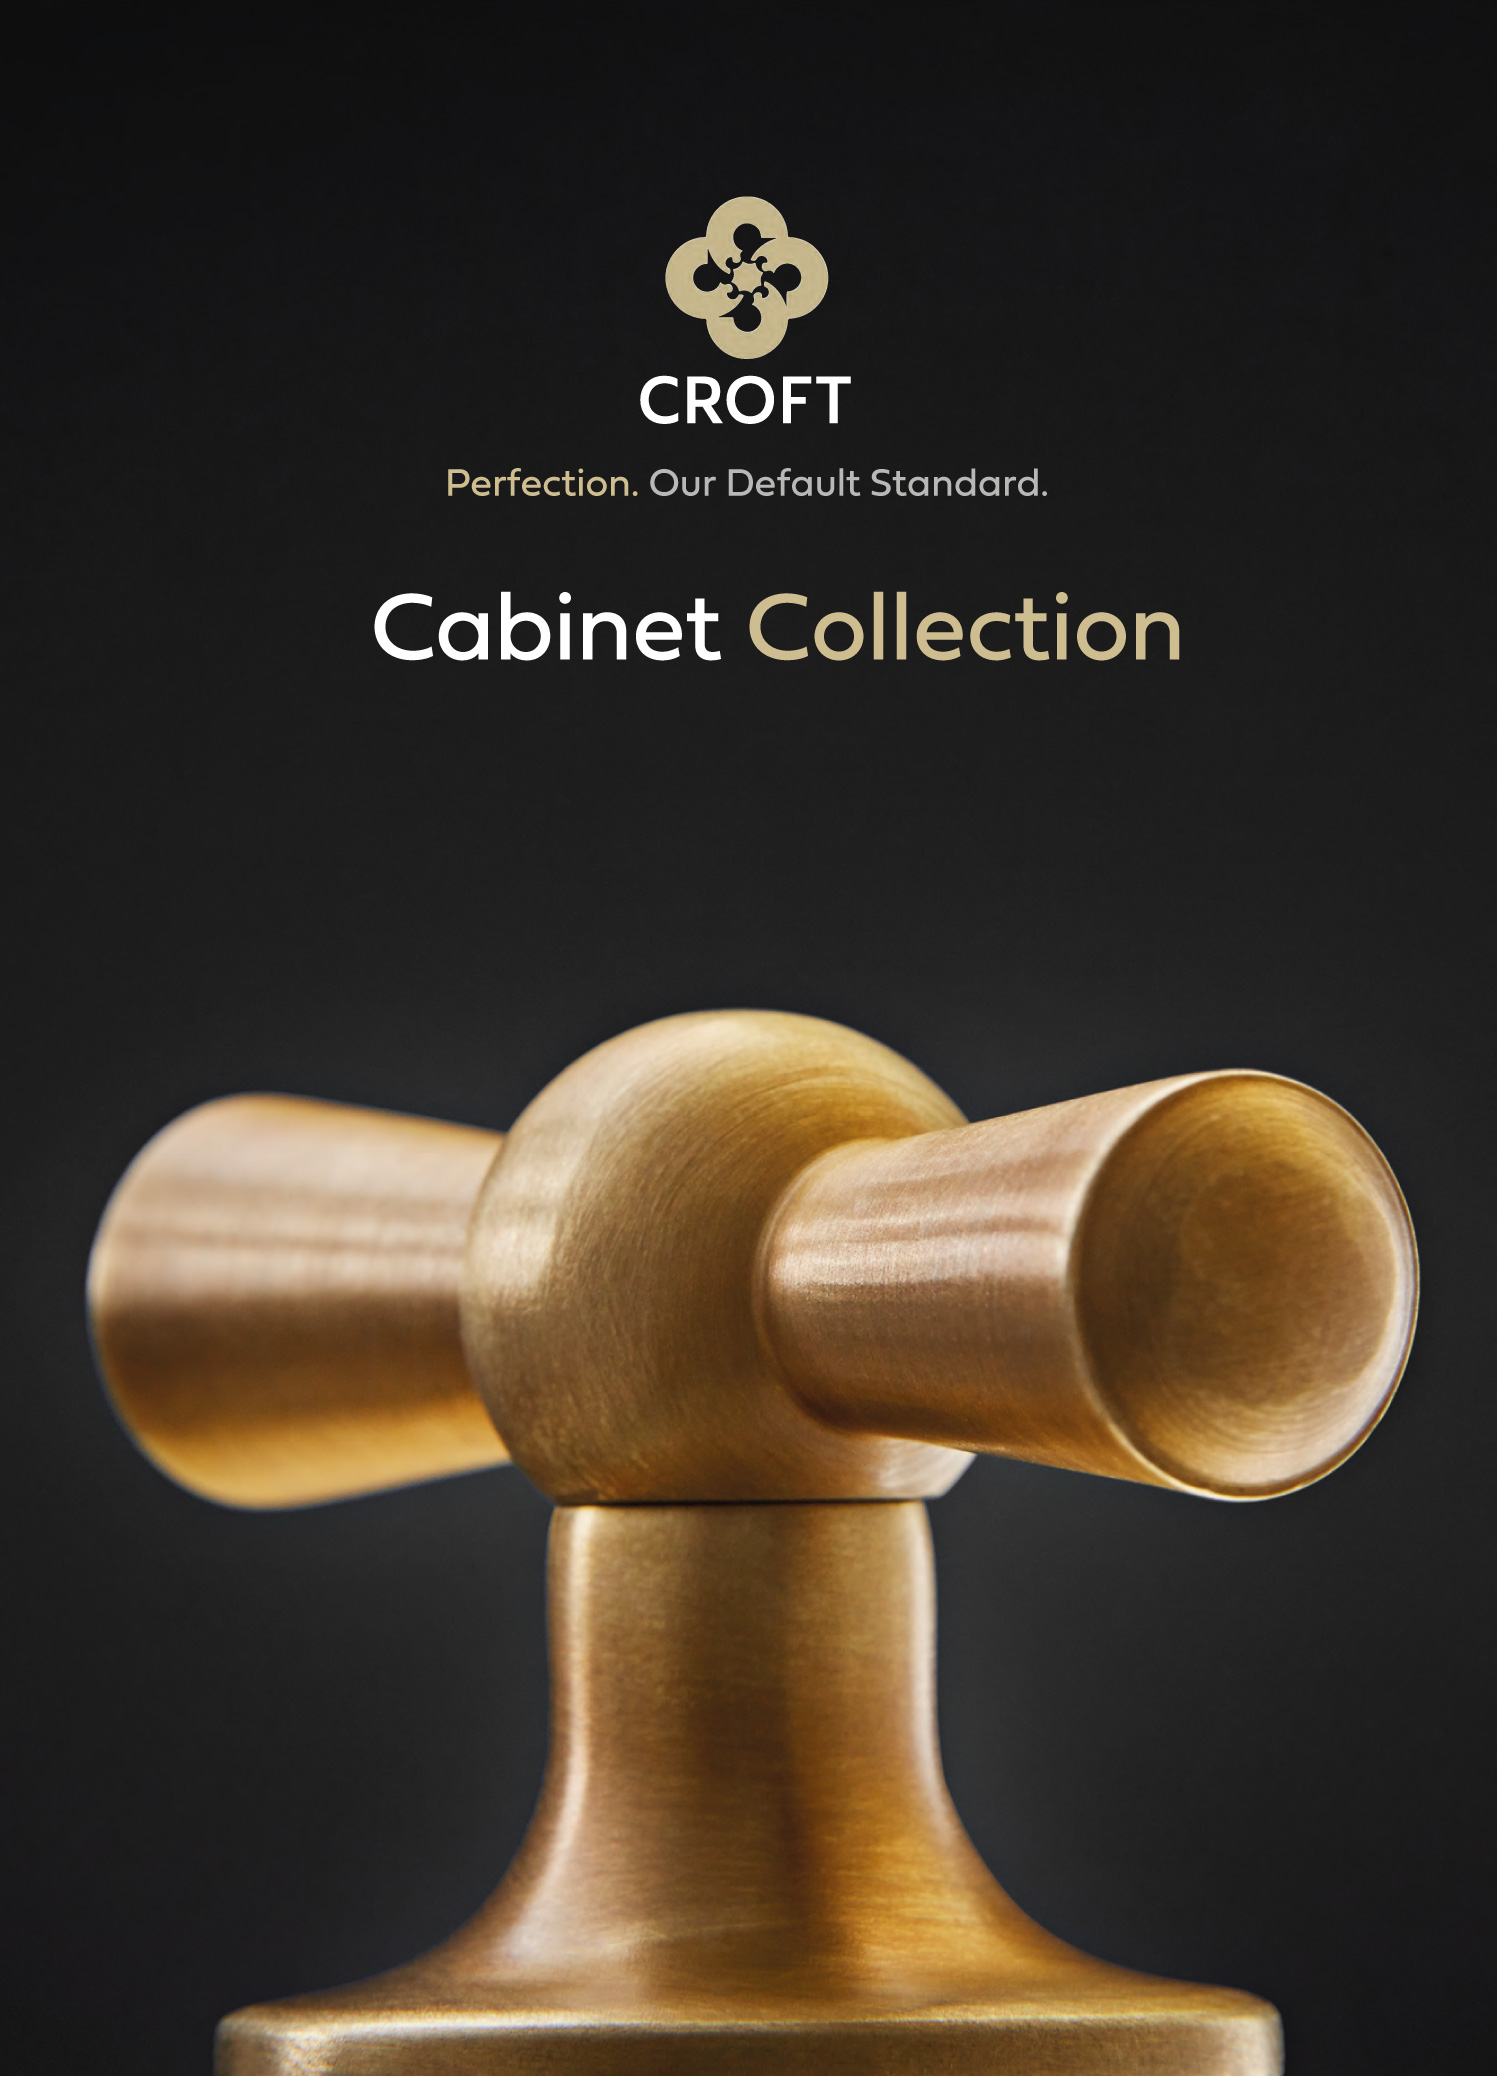 Cabinet collection brochure by Croft